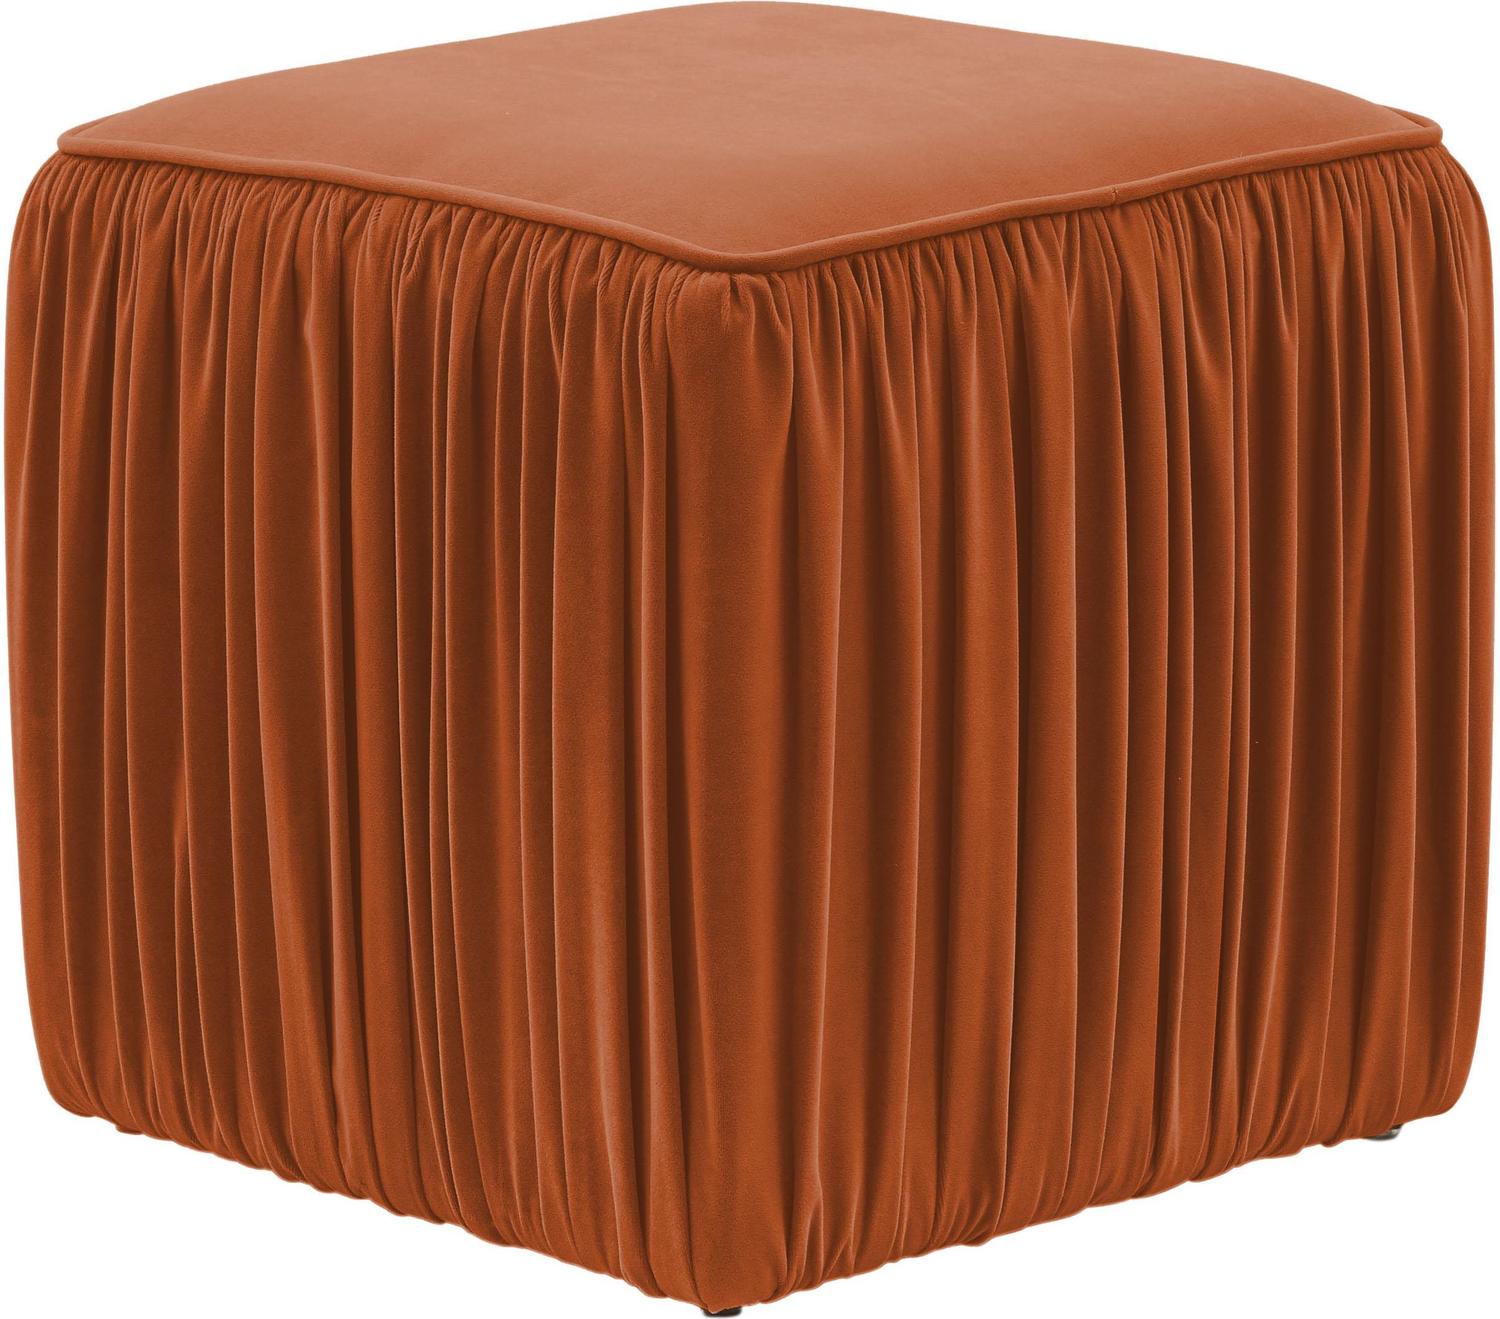 shoe storage bench with cushion Contemporary Design Furniture Ottomans Cognac